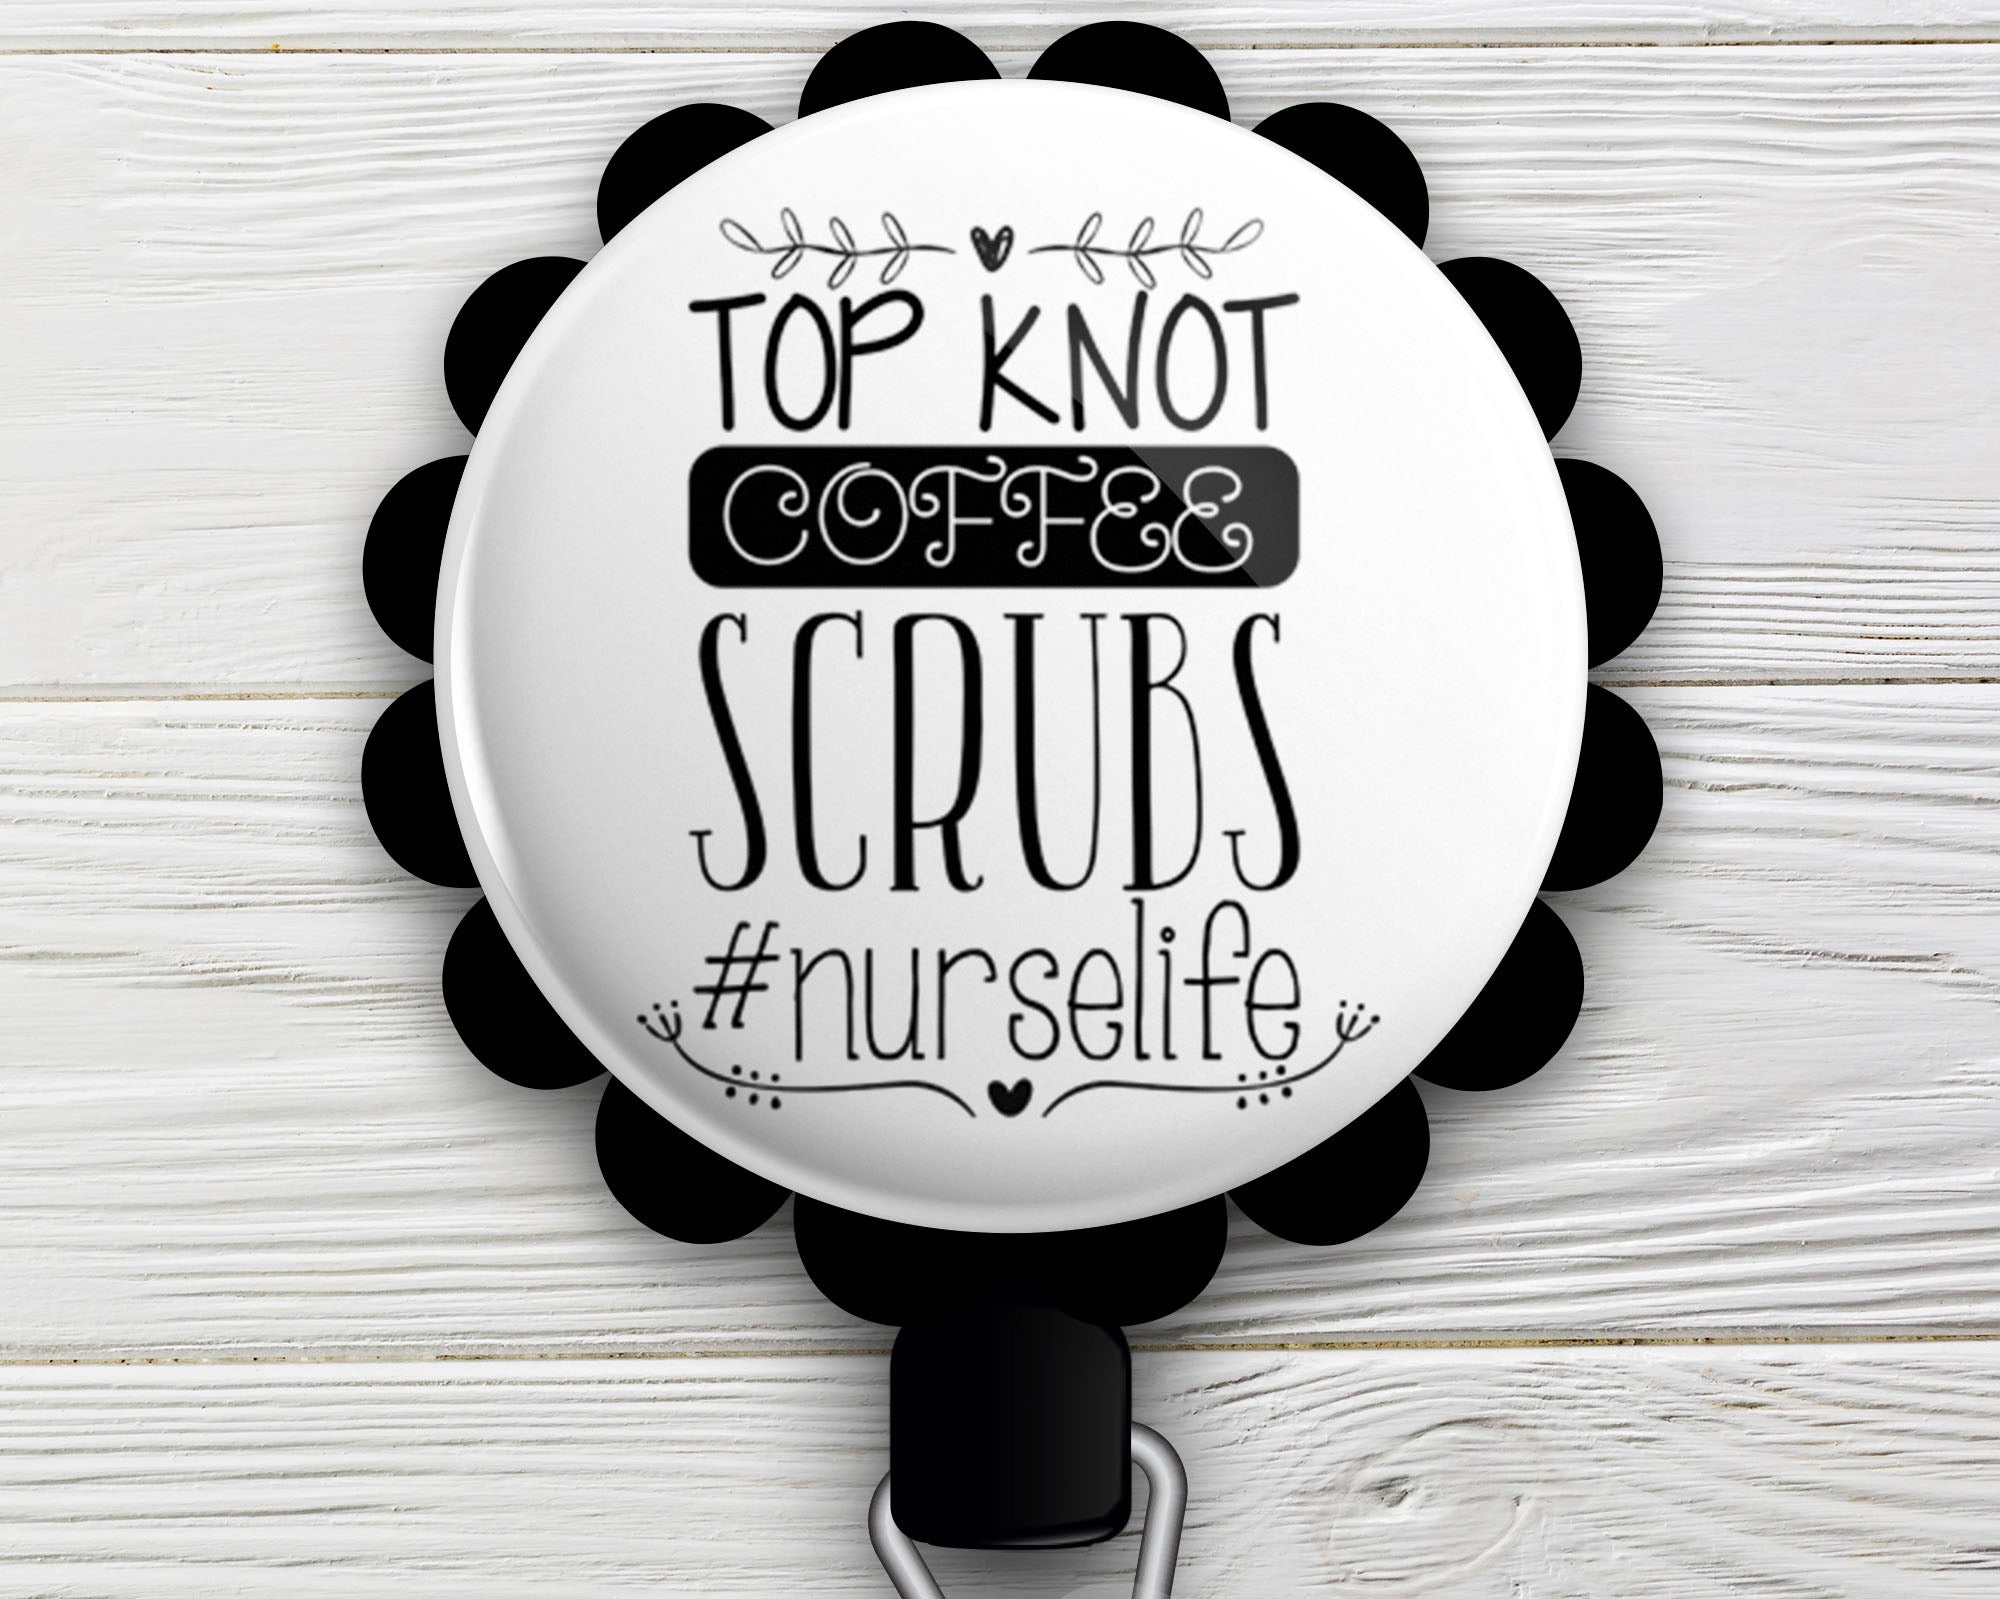 Top Knot, Coffee, Scrubs #nurselife Retractable ID Badge Reel • Gift for Nurse • Swappable ID Badge Holder • Swapfinity - Alligator Clip / Black - Topperswap